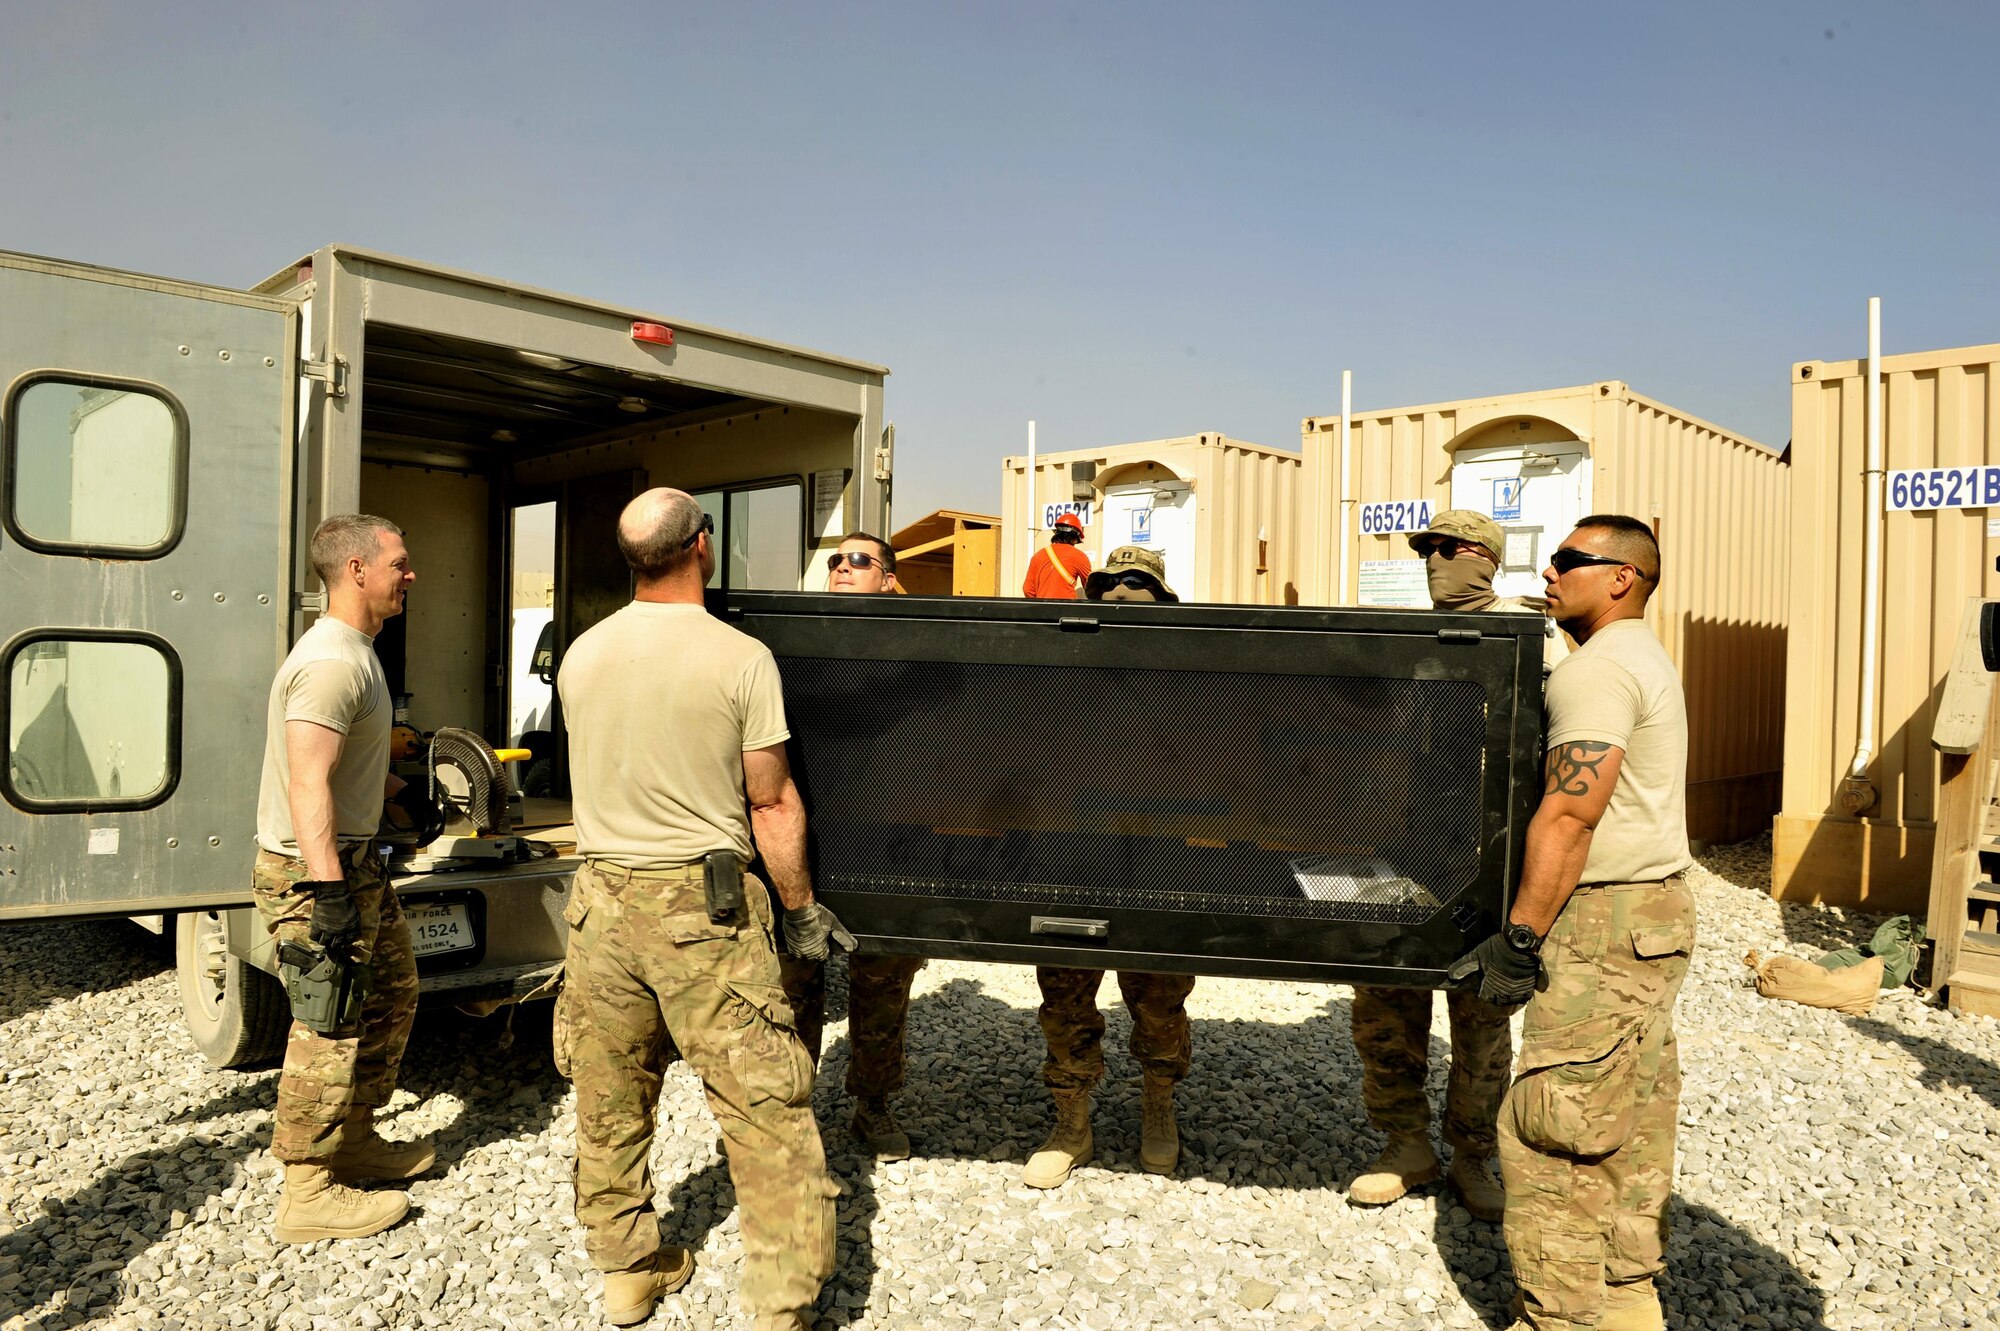 Airmen assigned to the 455th Expeditionary Communications Squadron unload a computer tower on Bagram Airfield, Afghanistan. The supplies will be used to build a communications equipment room and other systems. The Airmen spent three days setting up communication capability for future Jordanian coalition partners here. (U.S. Air Force photo/ Staff Sgt. Stephenie Wade)